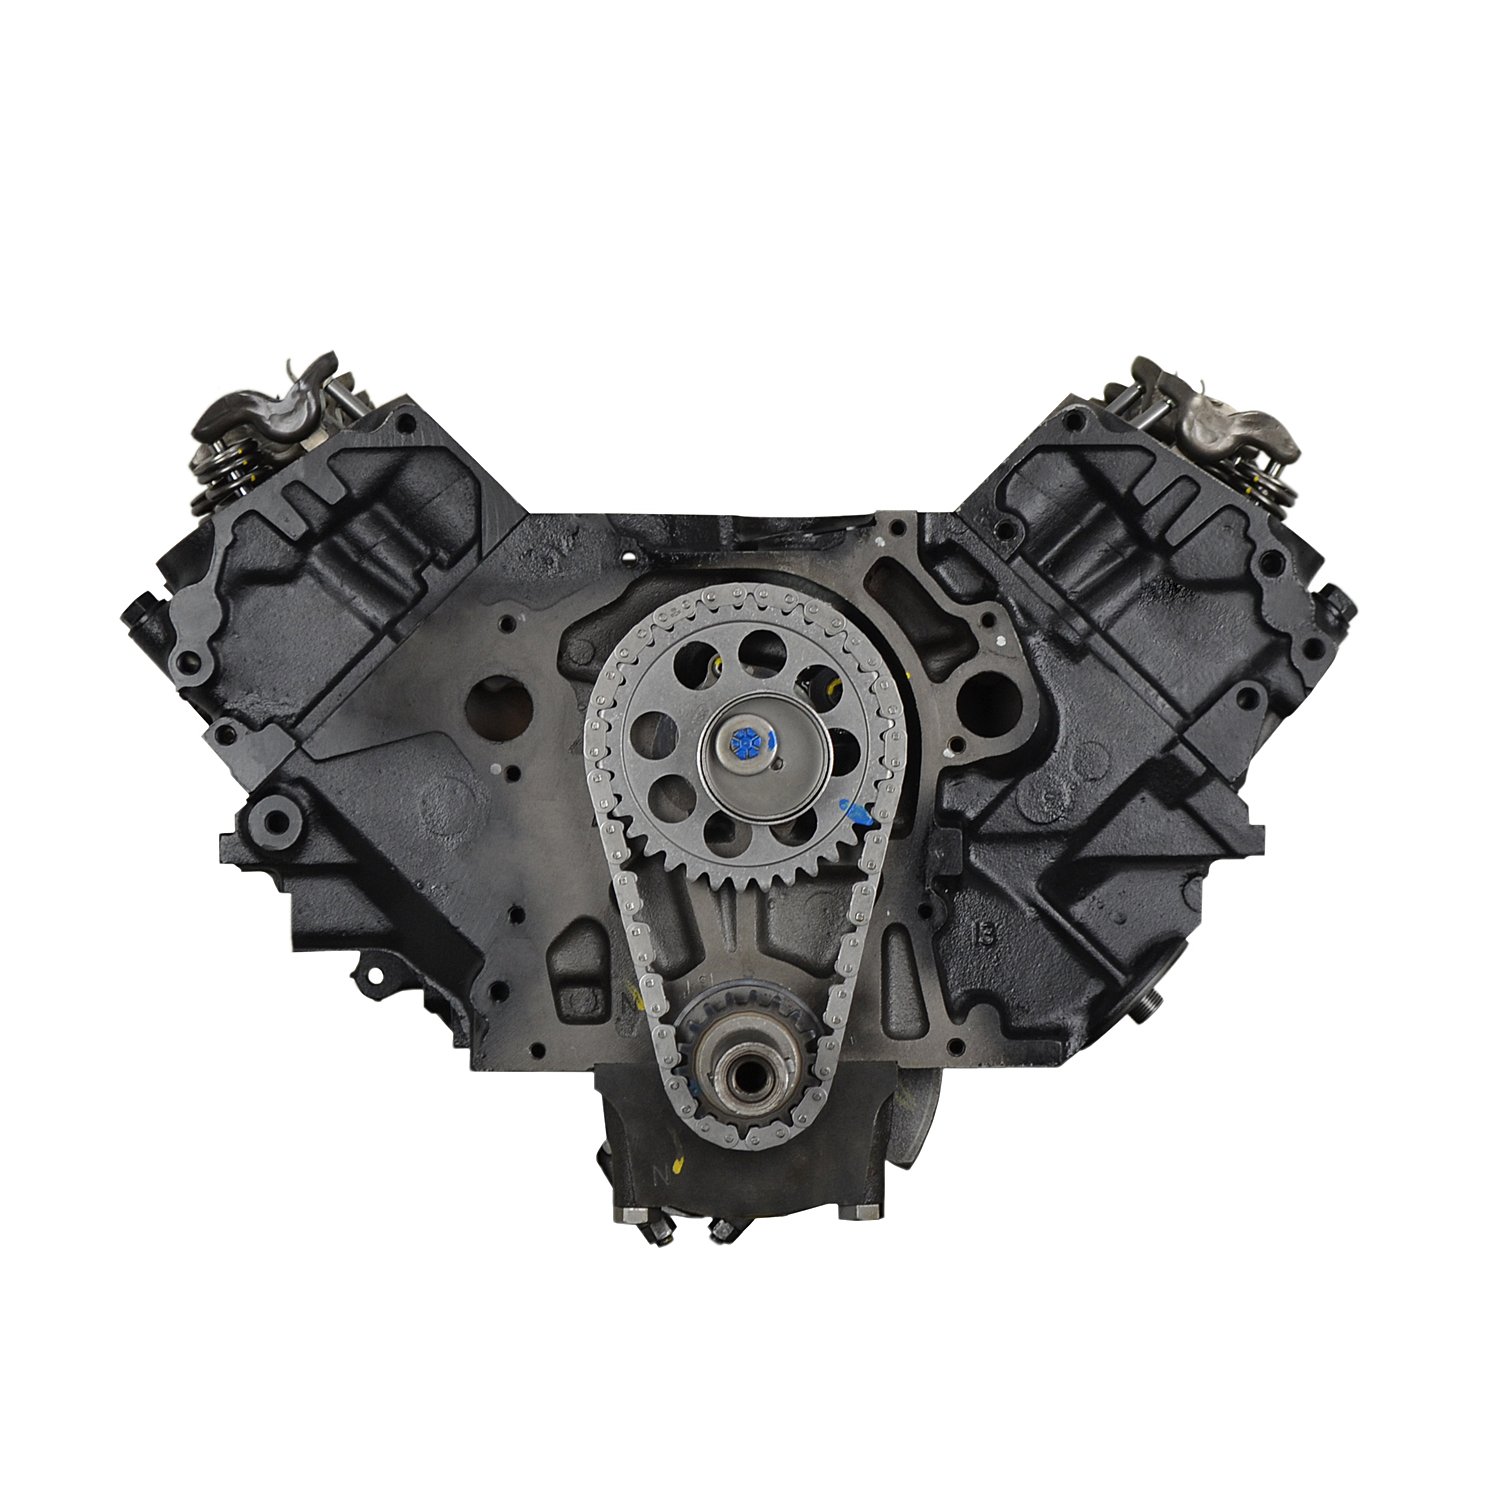 DF48 Remanufactured Crate Engine for 1972-1979 Ford Truck, Car, & Van with 460ci/7.5L V8